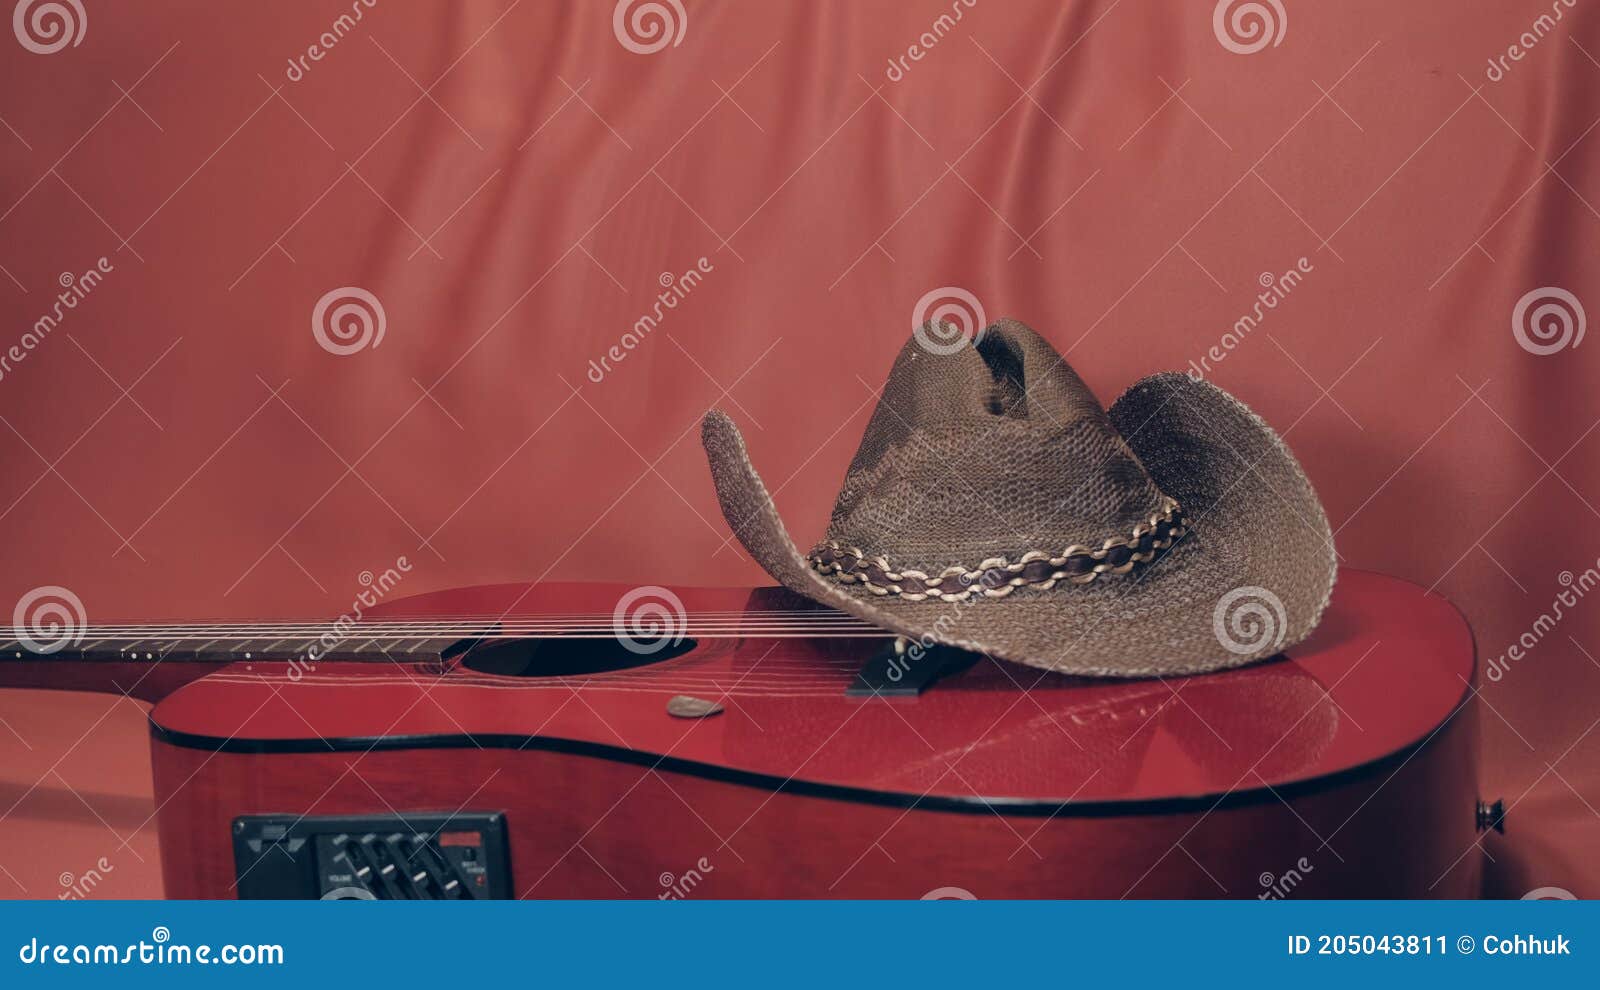 red acoustic guitar with a cowboy hat on it